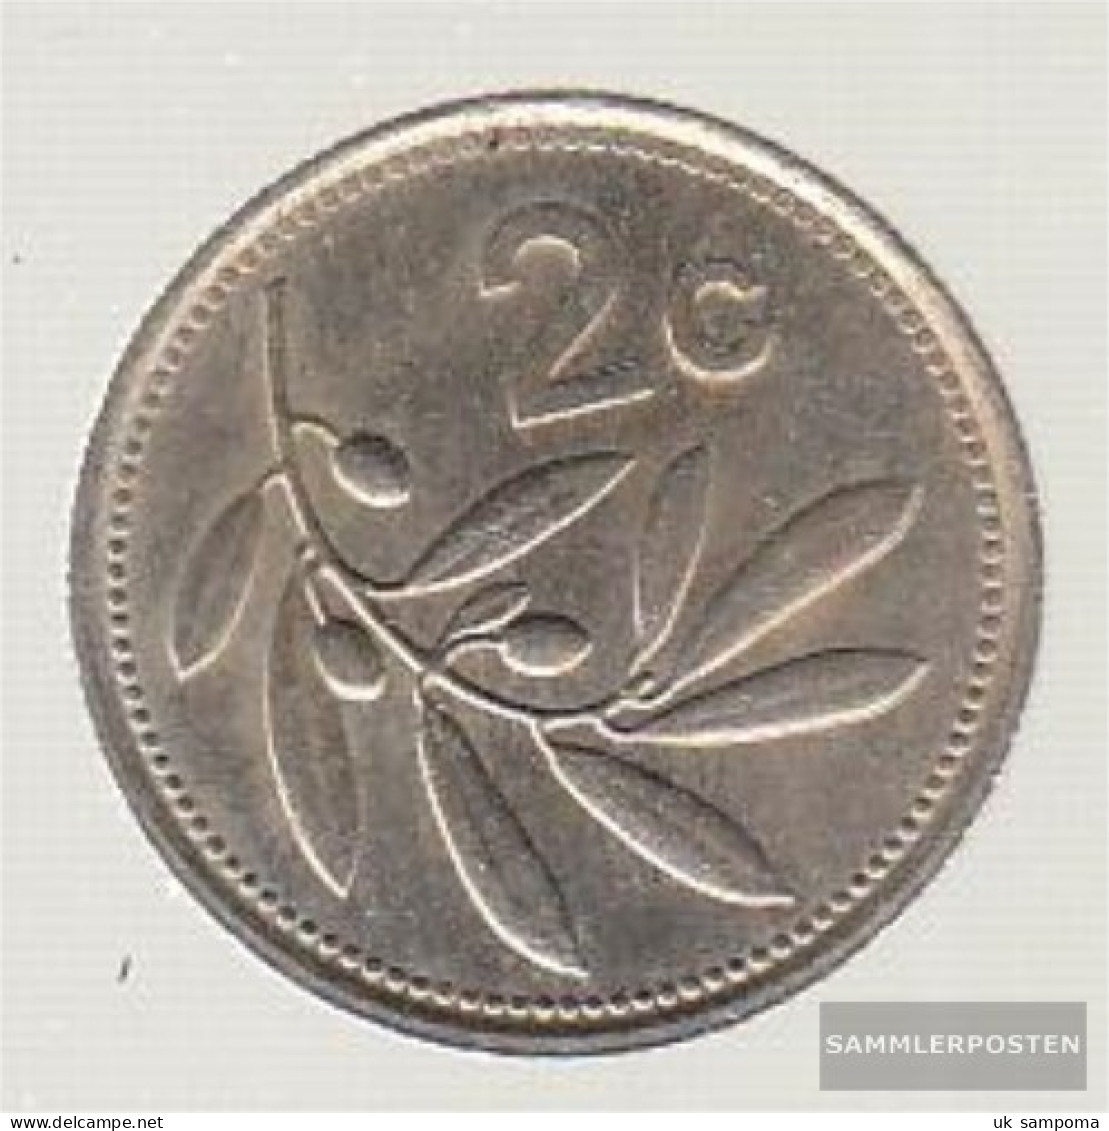 Malta Km-number. : 79 1986 Extremely Fine Copper-Nickel Extremely Fine 1986 2 Cent Emblem - Malte